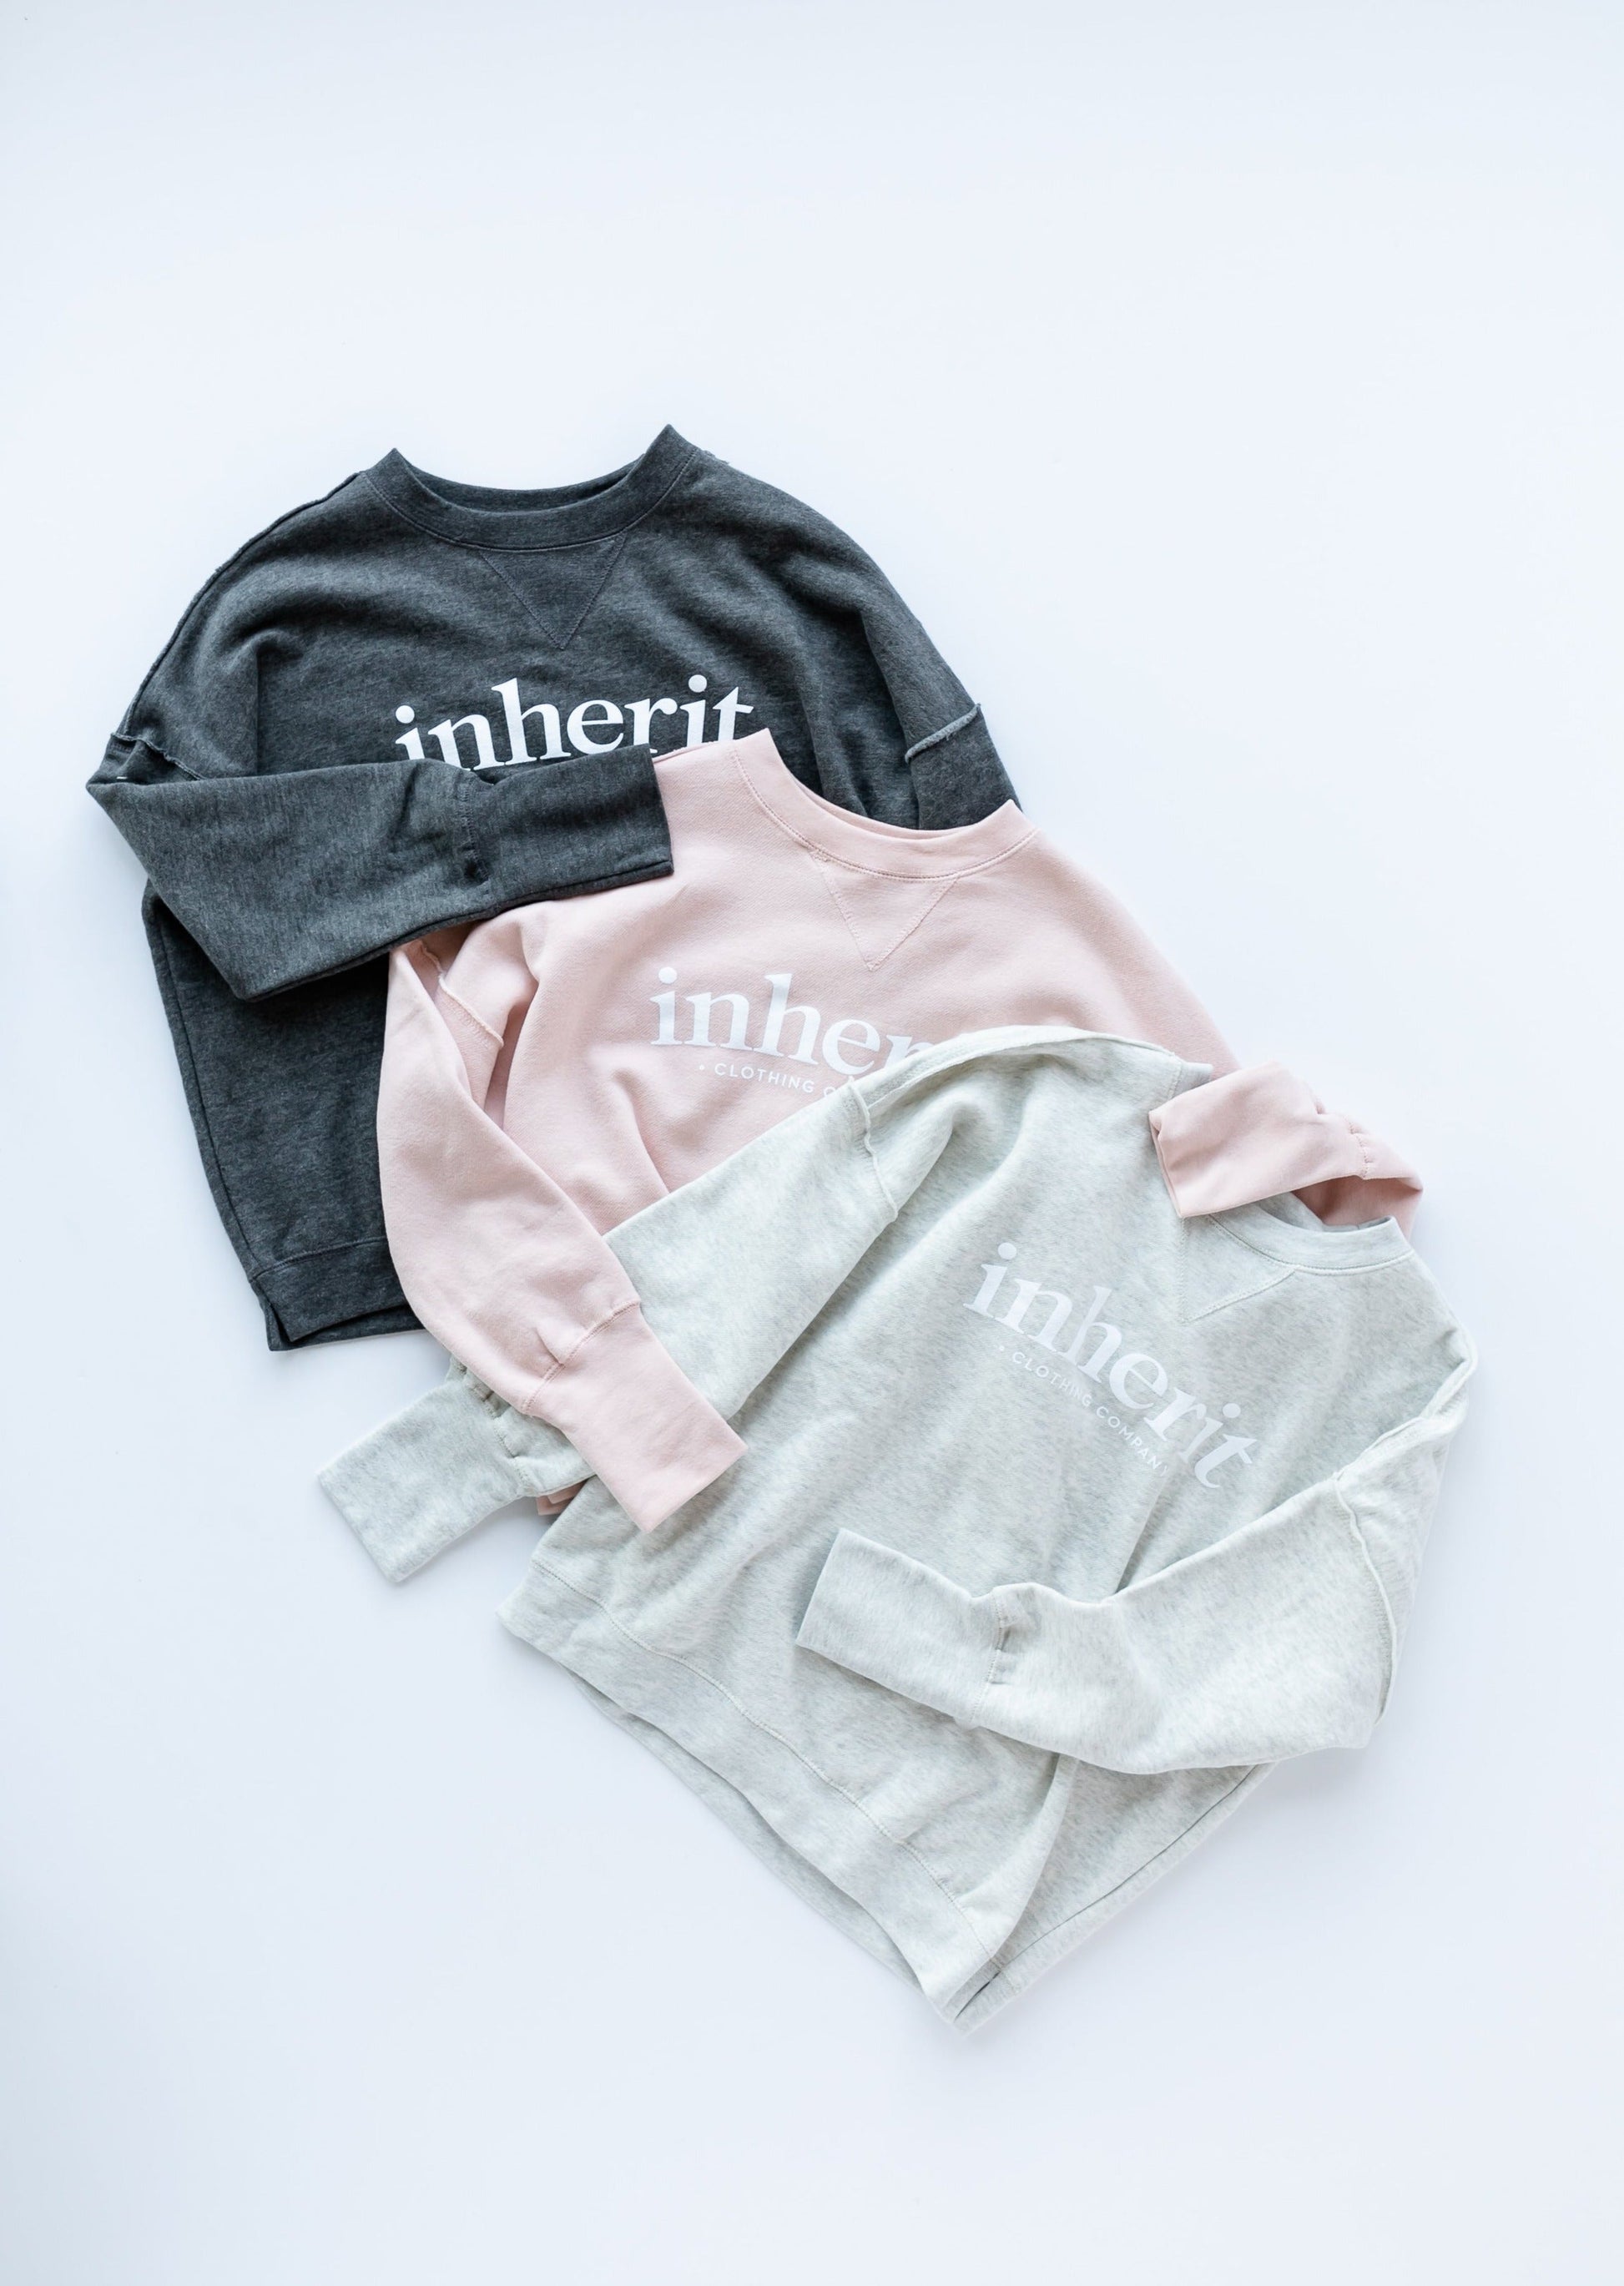 Inherit Crew Neck Sweatshirt Tops come in charcoal, blush pink, or hearthered light grey. They have white Inherit logo across the front. There is a raw hem detail on the arms around the bicep and then another raw hem down the shoulder and stopping where the two touch.